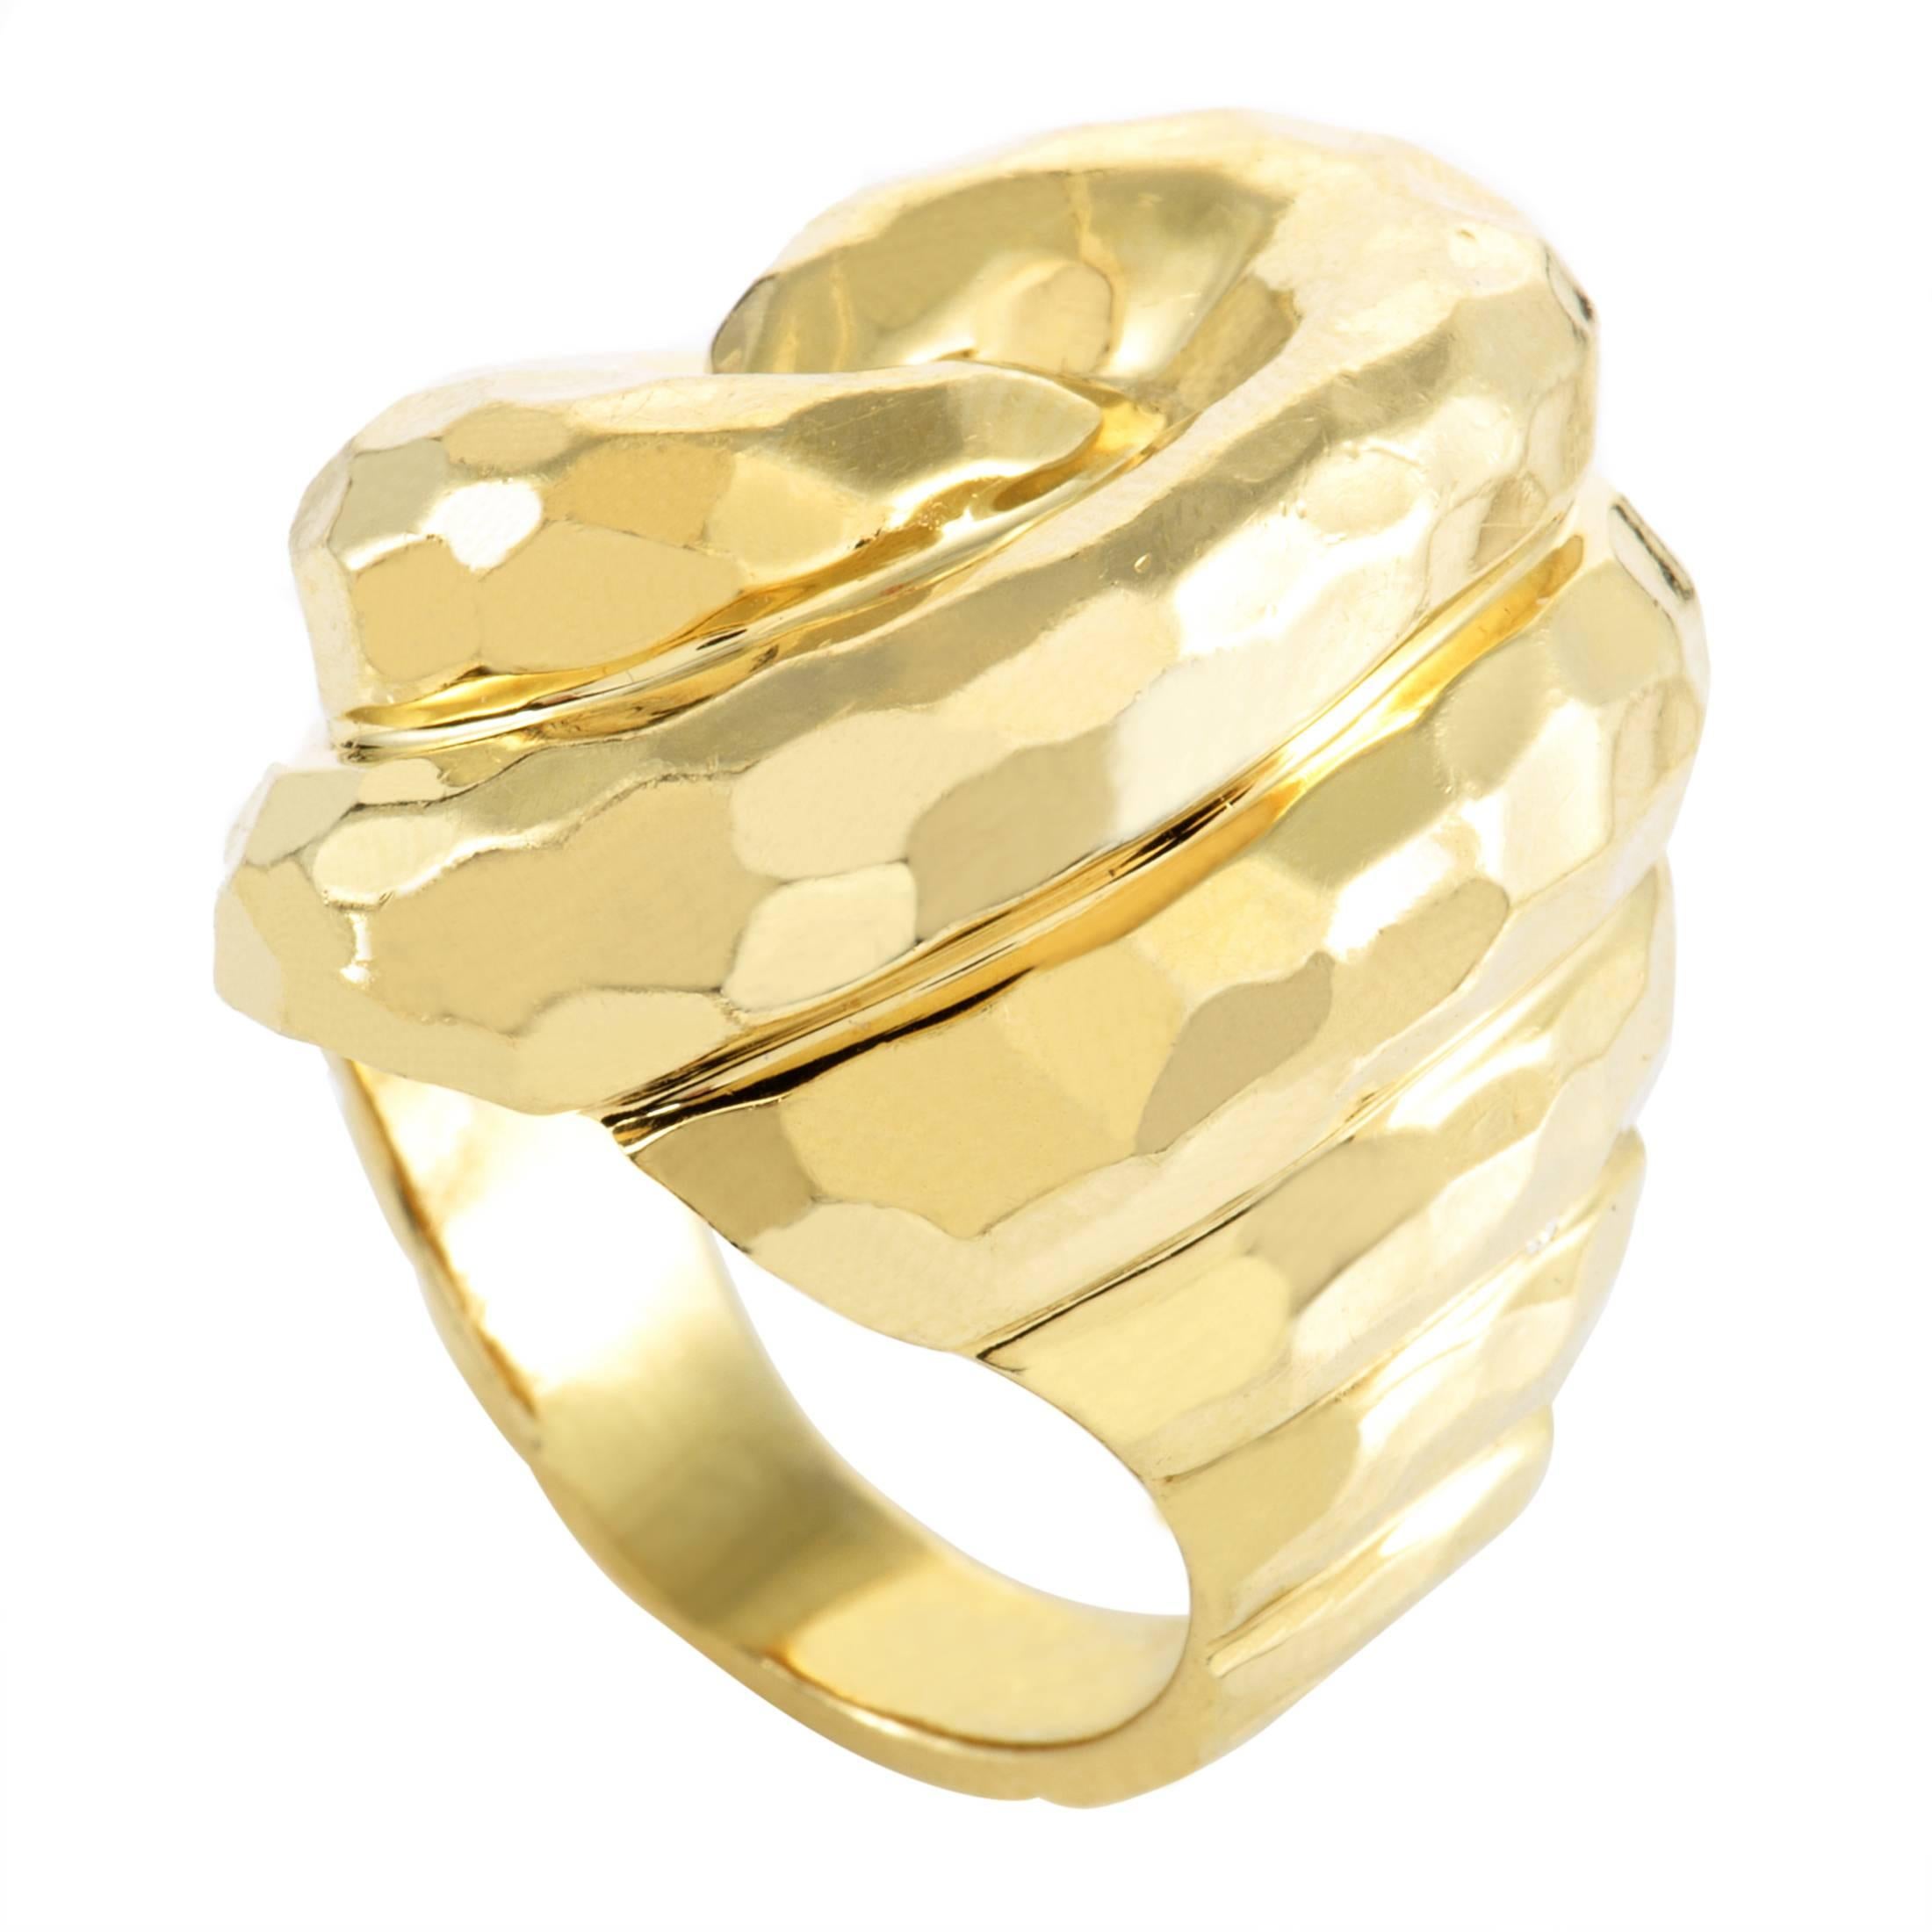 Henry Dunay Hammered Yellow Gold Cocktail Ring